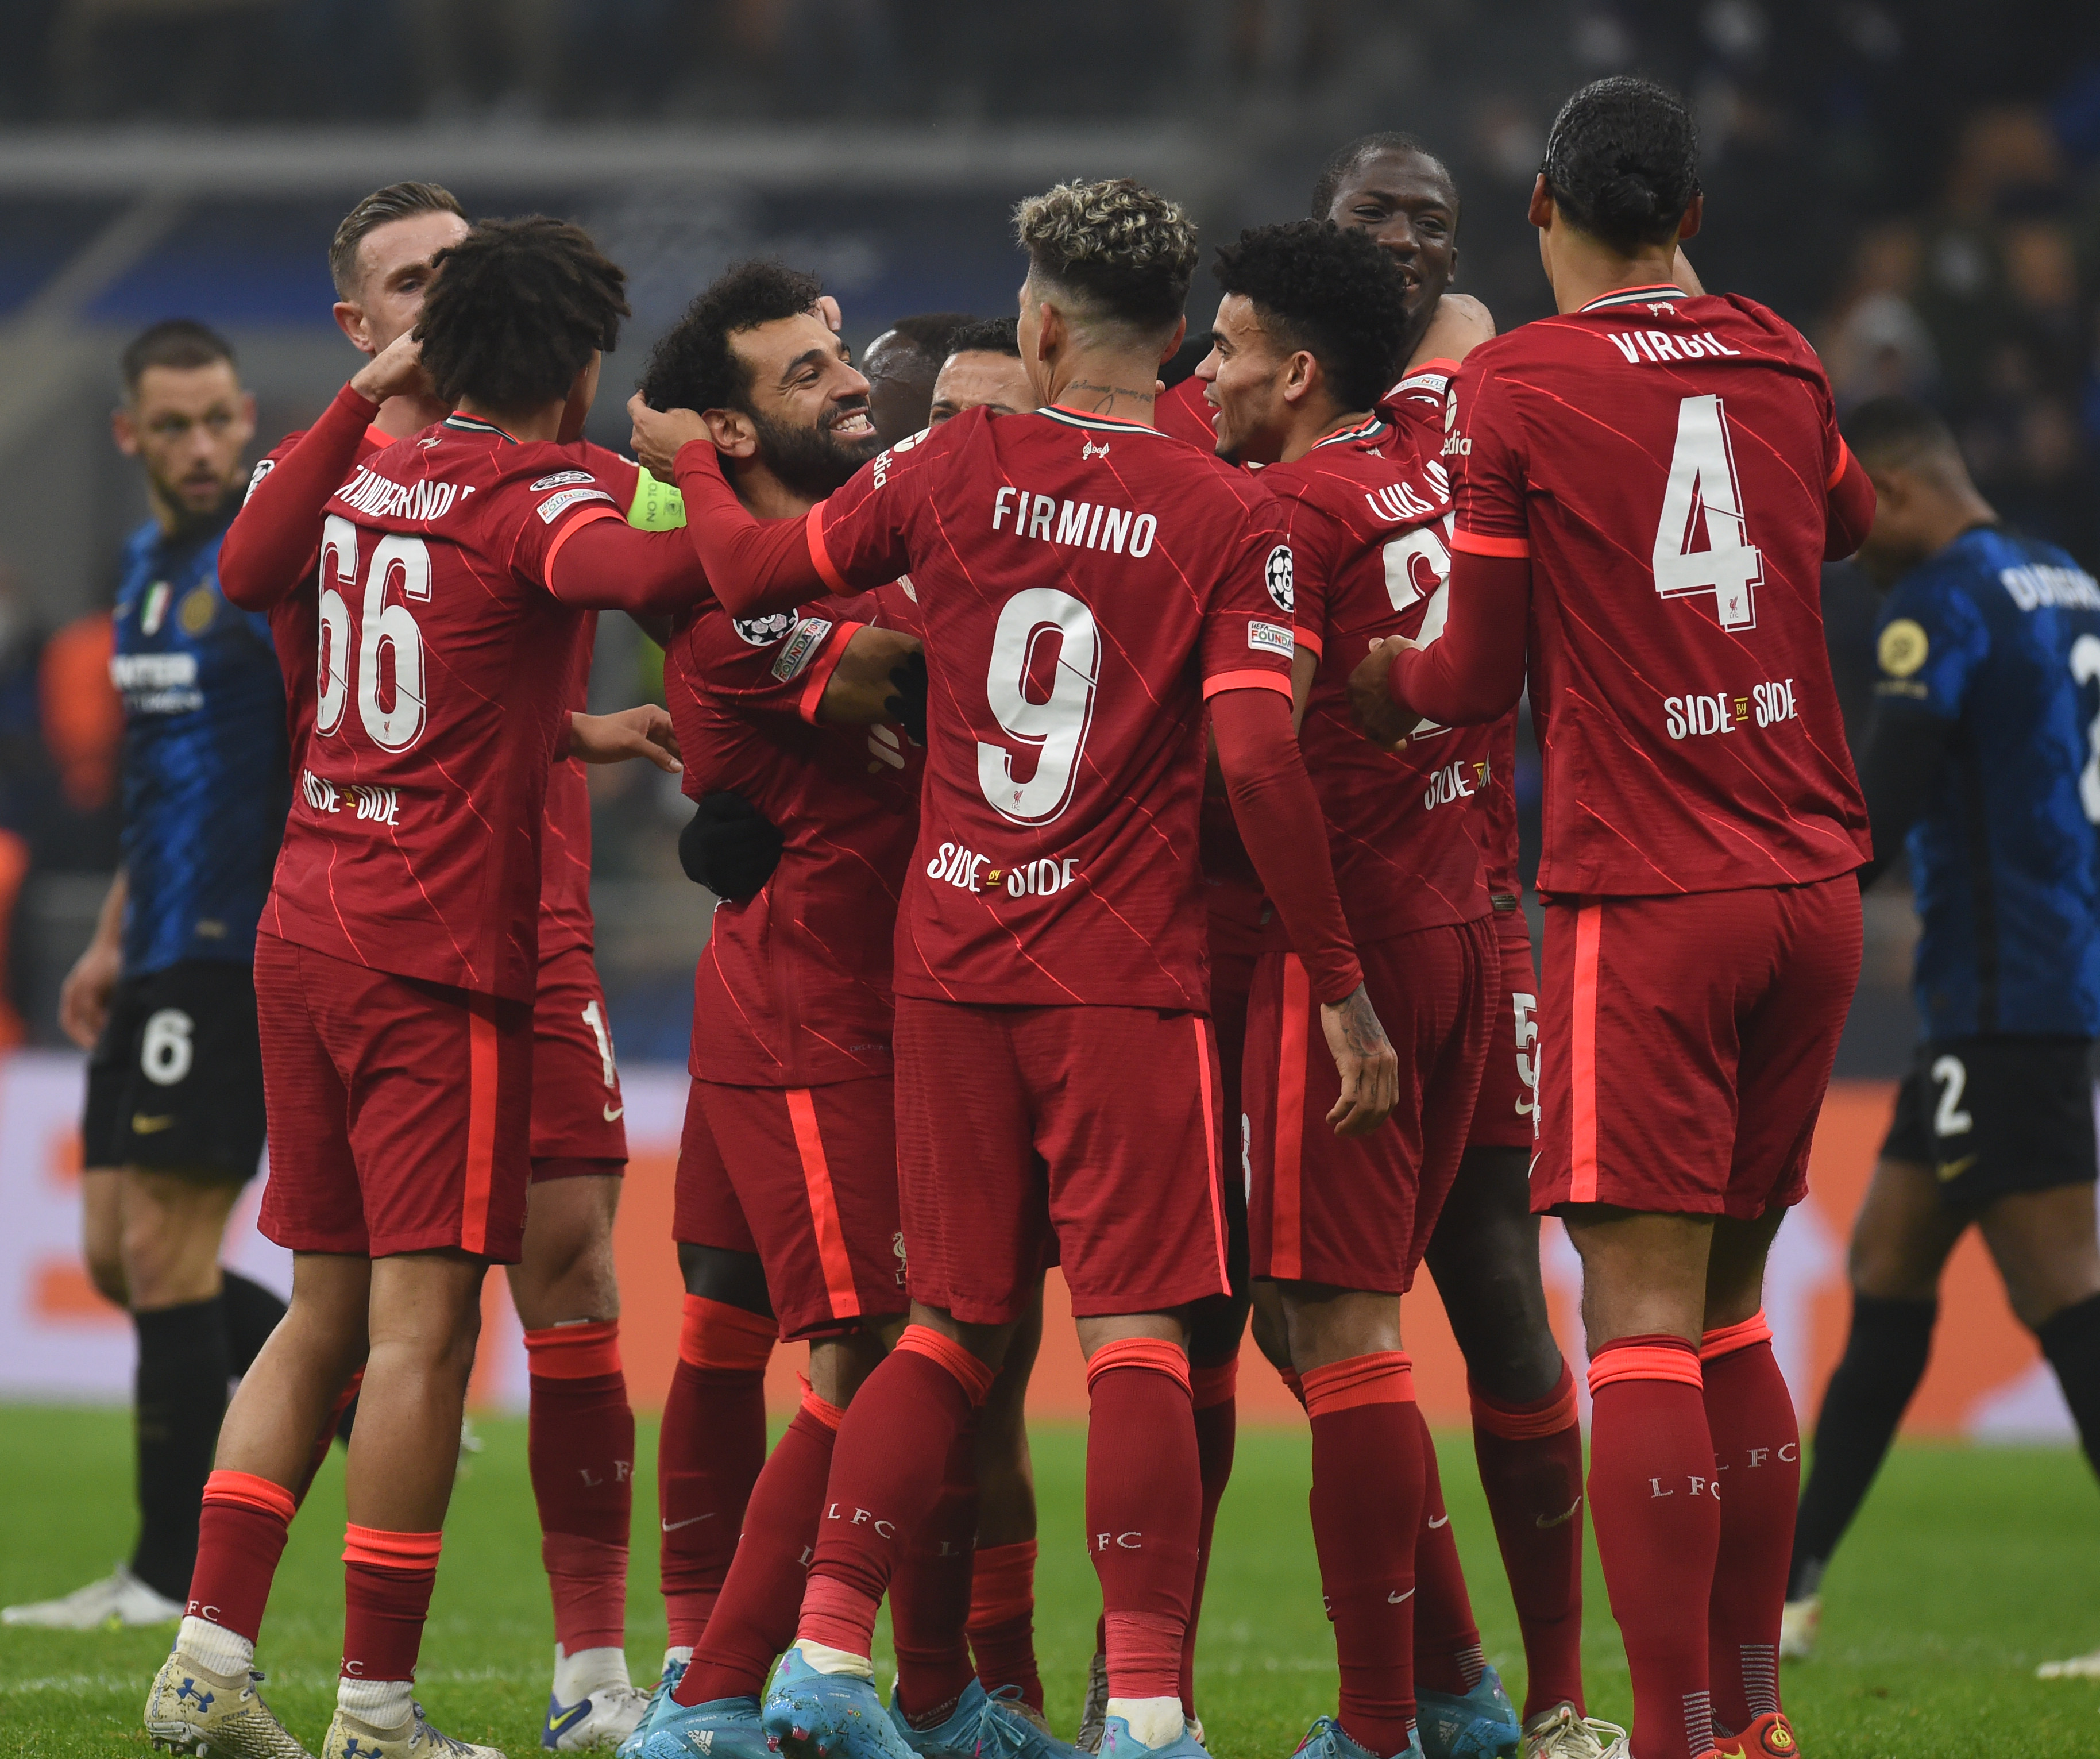 UEFA Champions League LIVE: Firmino, Salah score late goals as Liverpool beat Inter Milan 2-0 in the 1st Leg of the Last 16